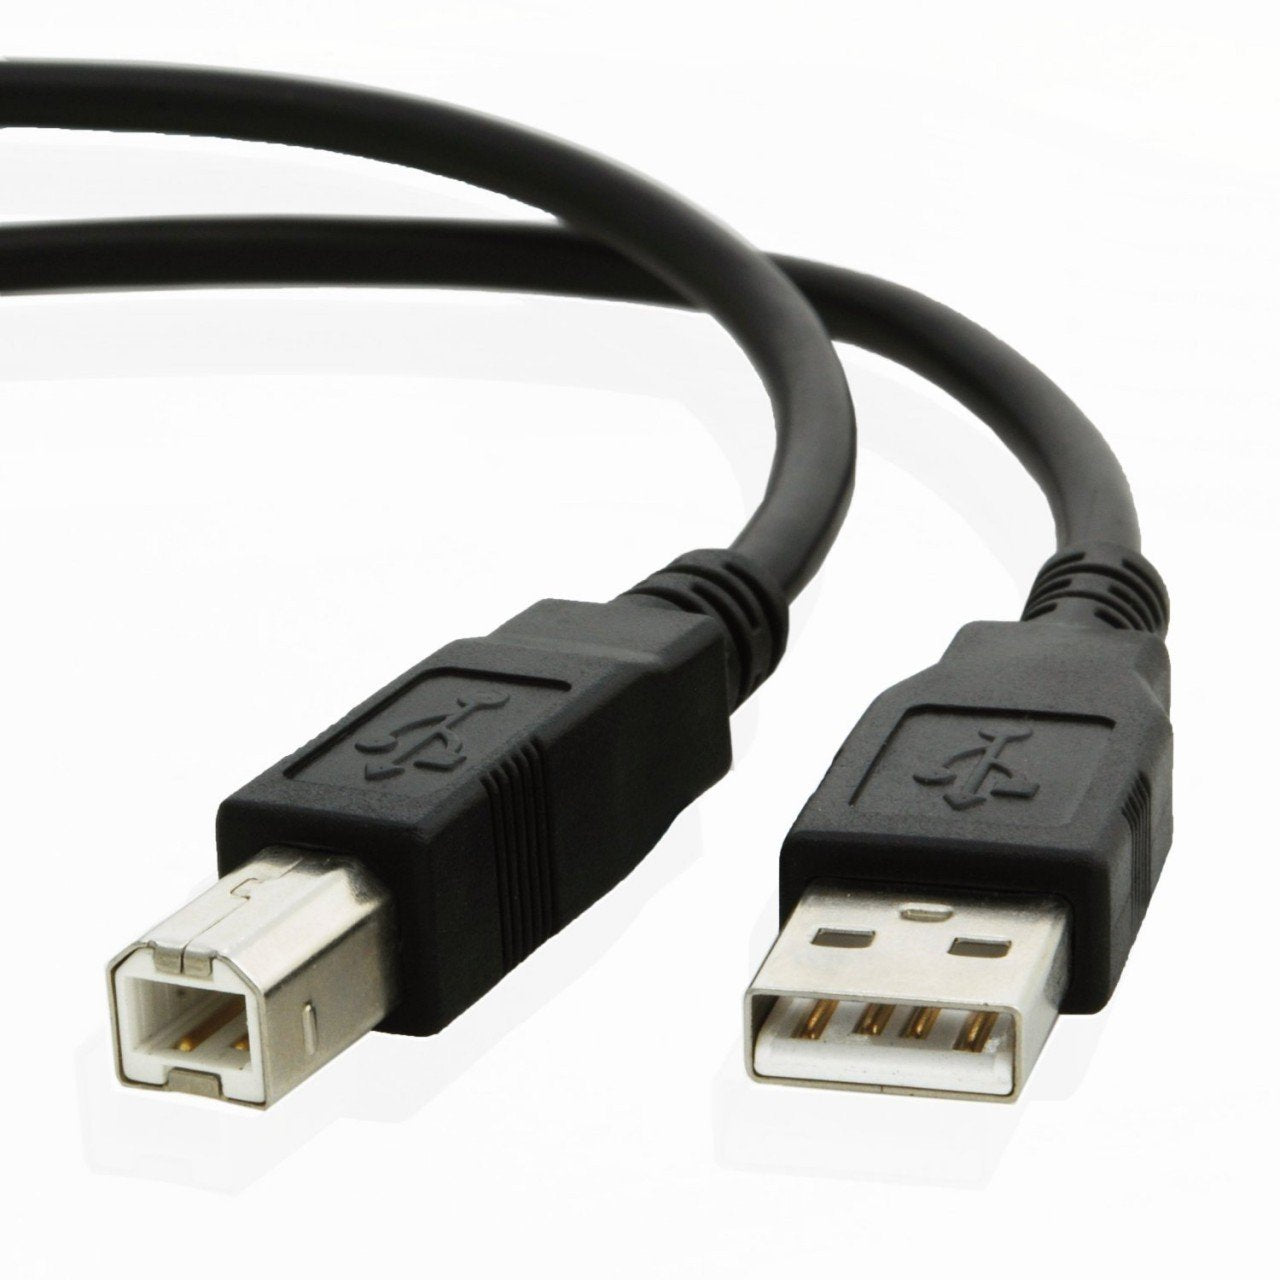 USB cable for Dell H825cdw